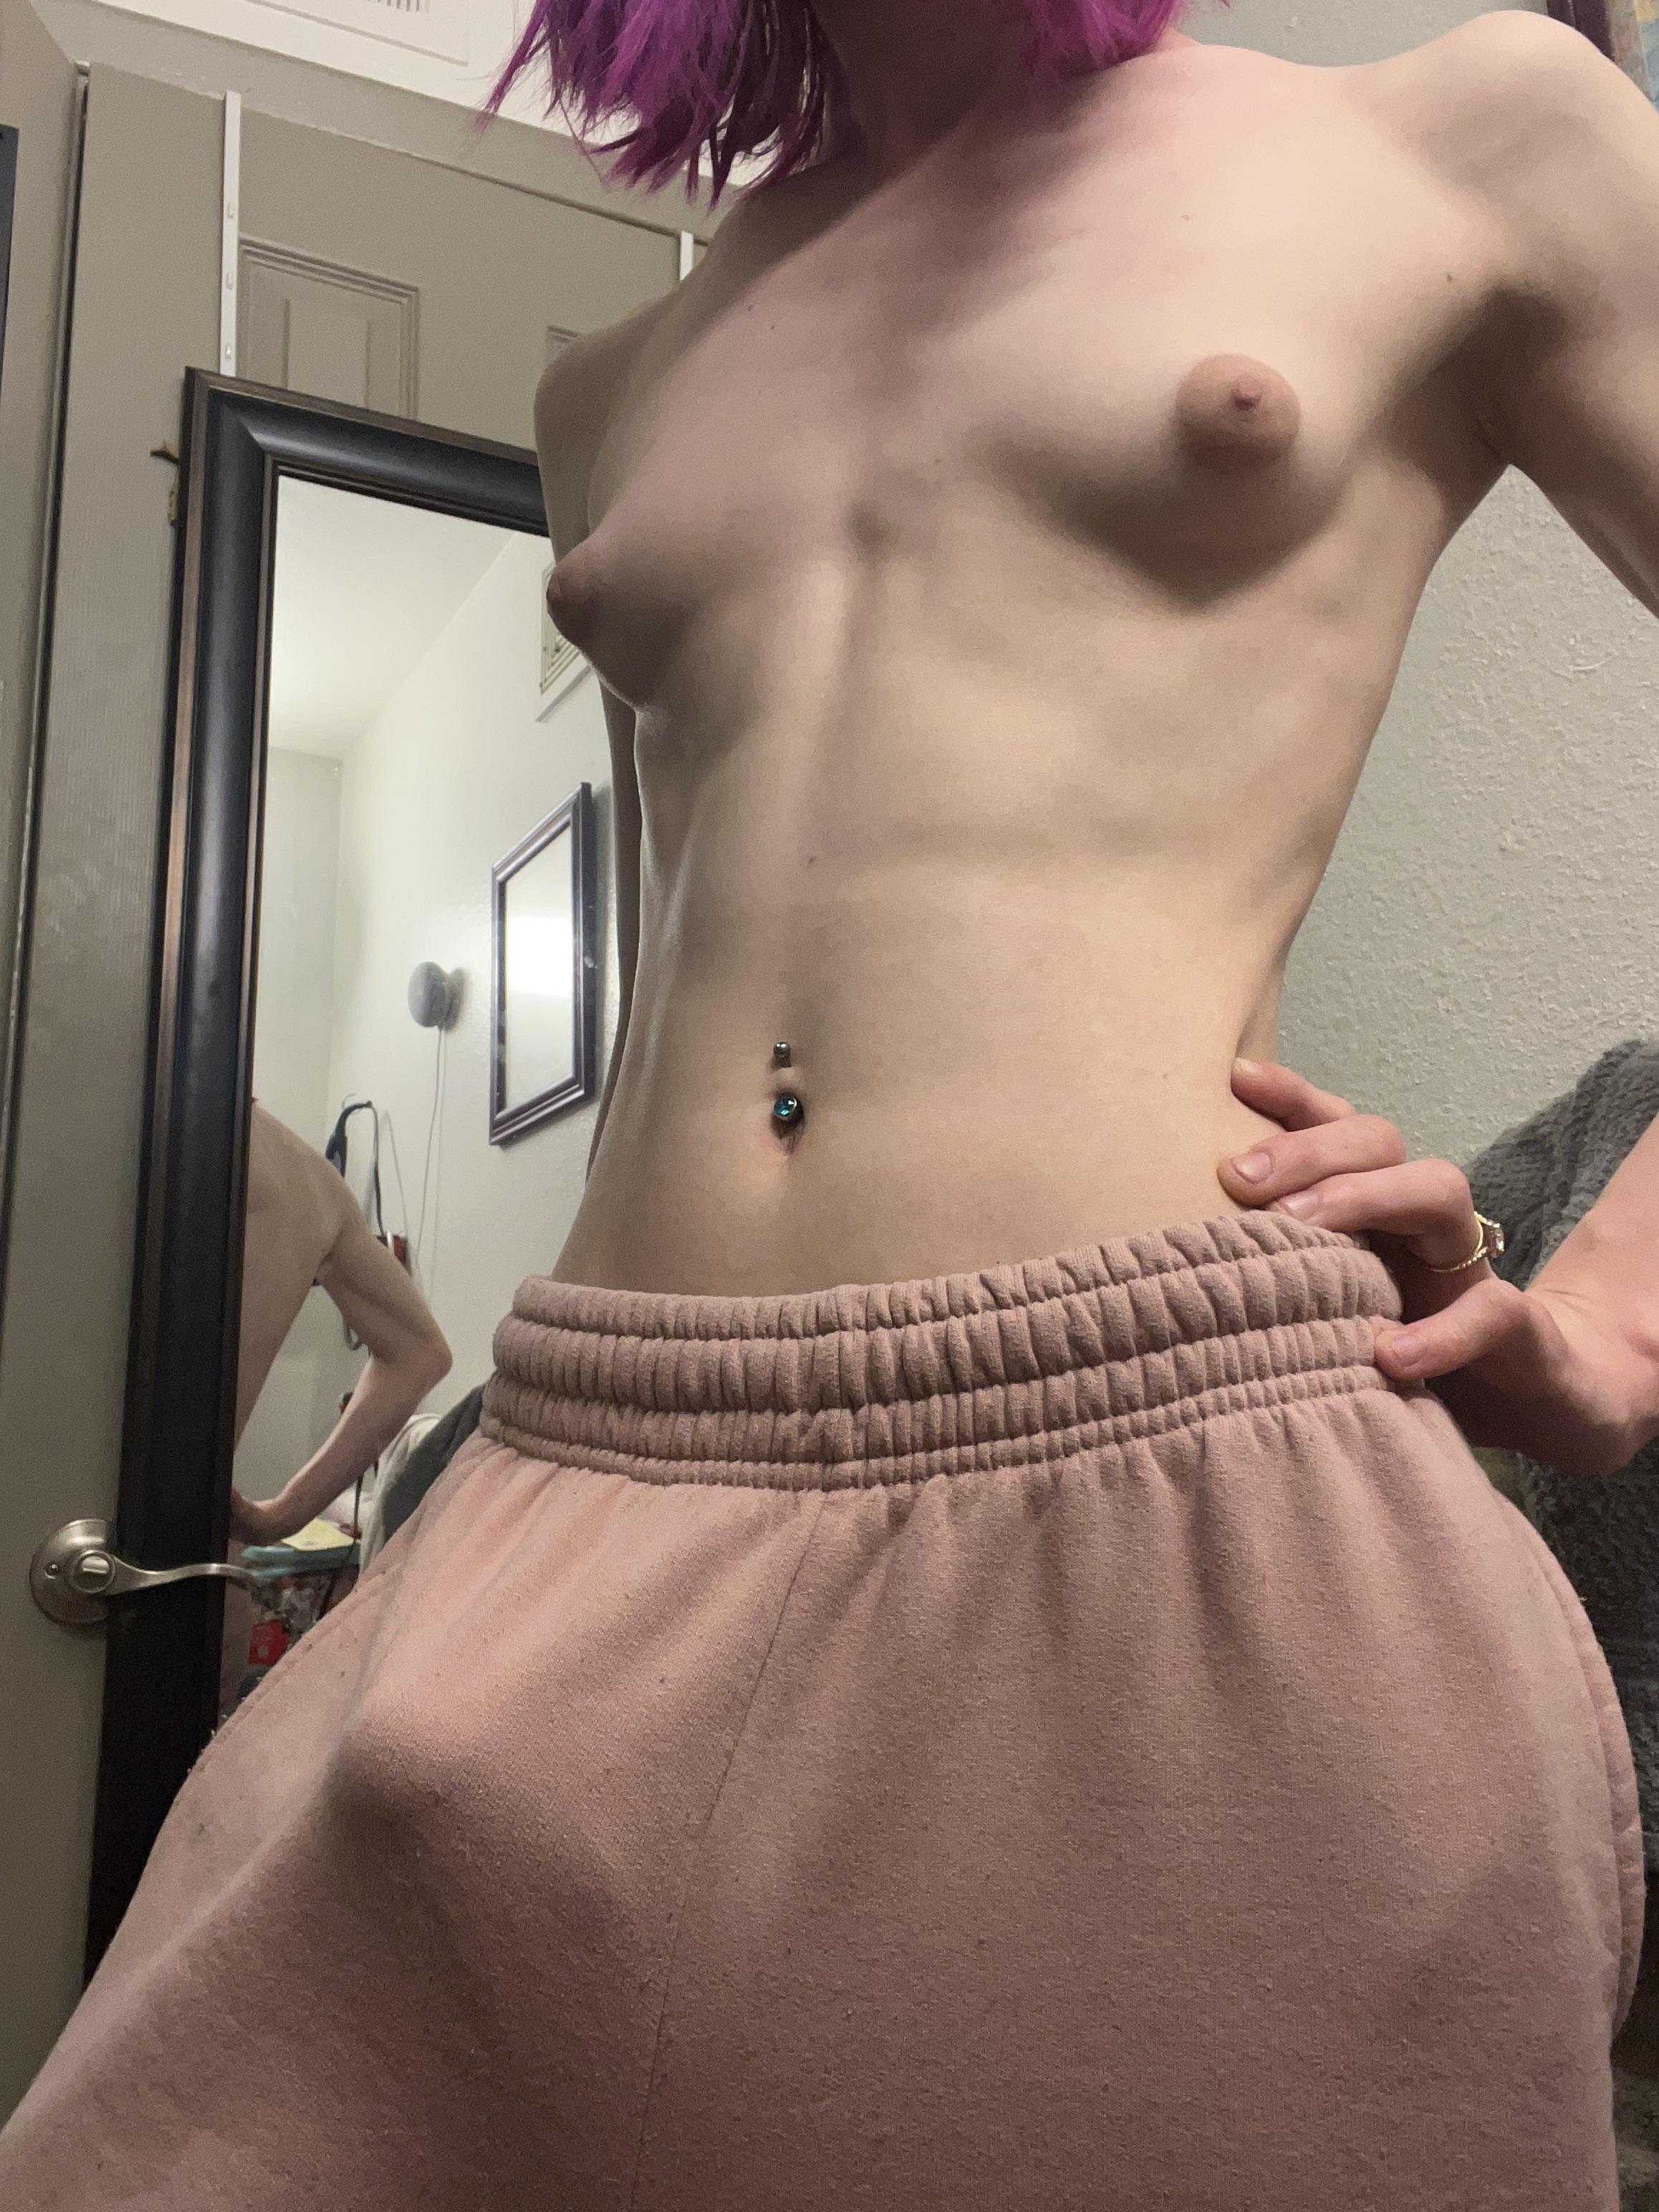 Hard Cock In Sweatpants - Do these sweatpants flatter my cock?